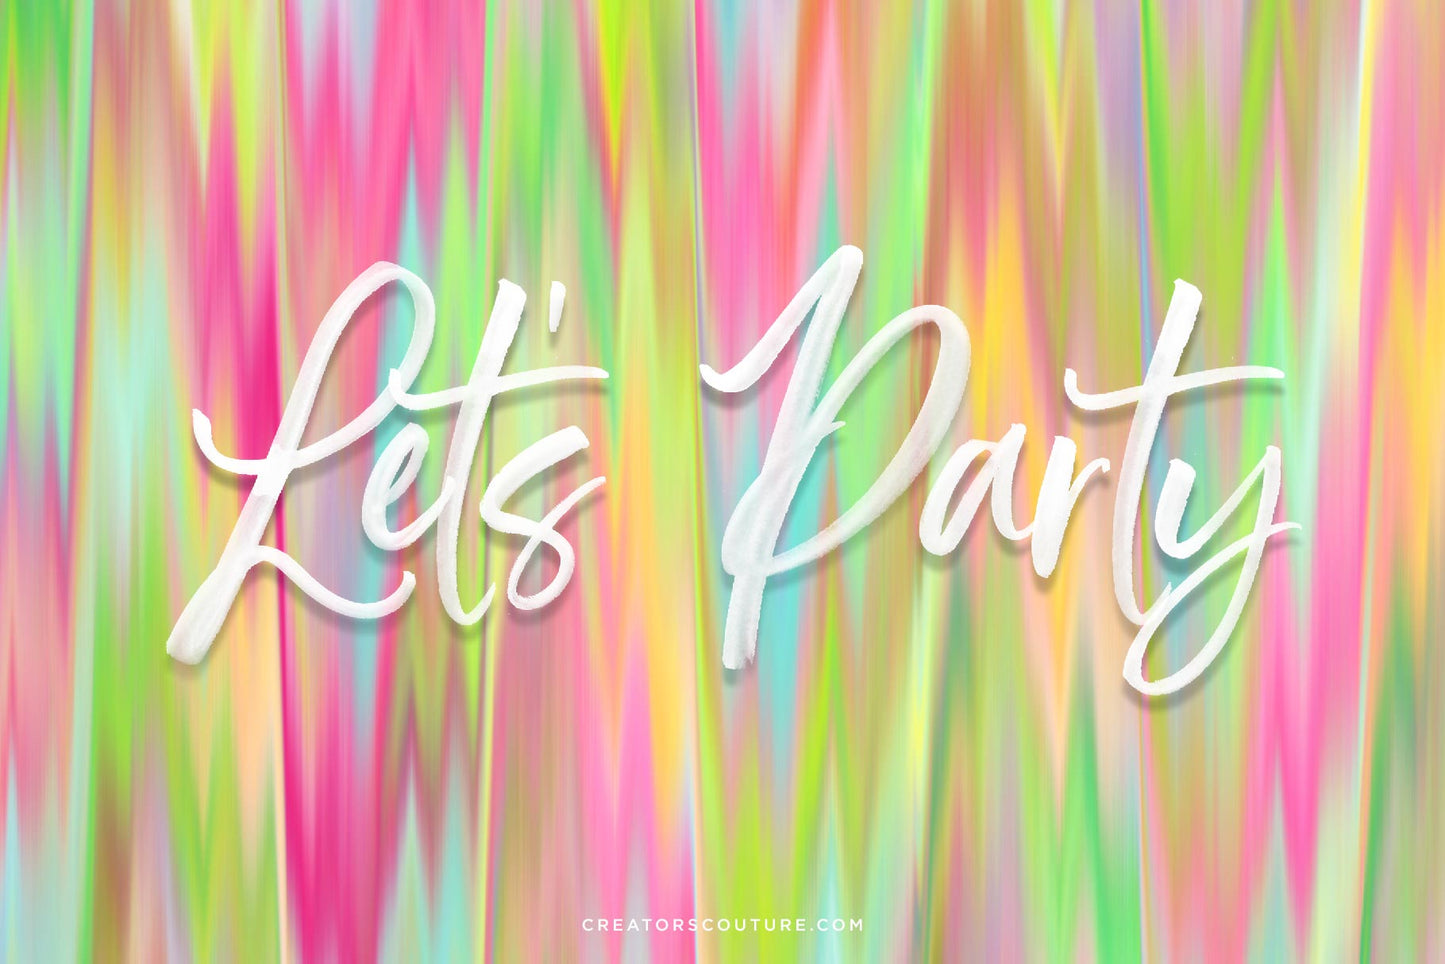 Ikat Inspired 'Palm Beach' Wet Paint Digital Backgrounds, party graphic